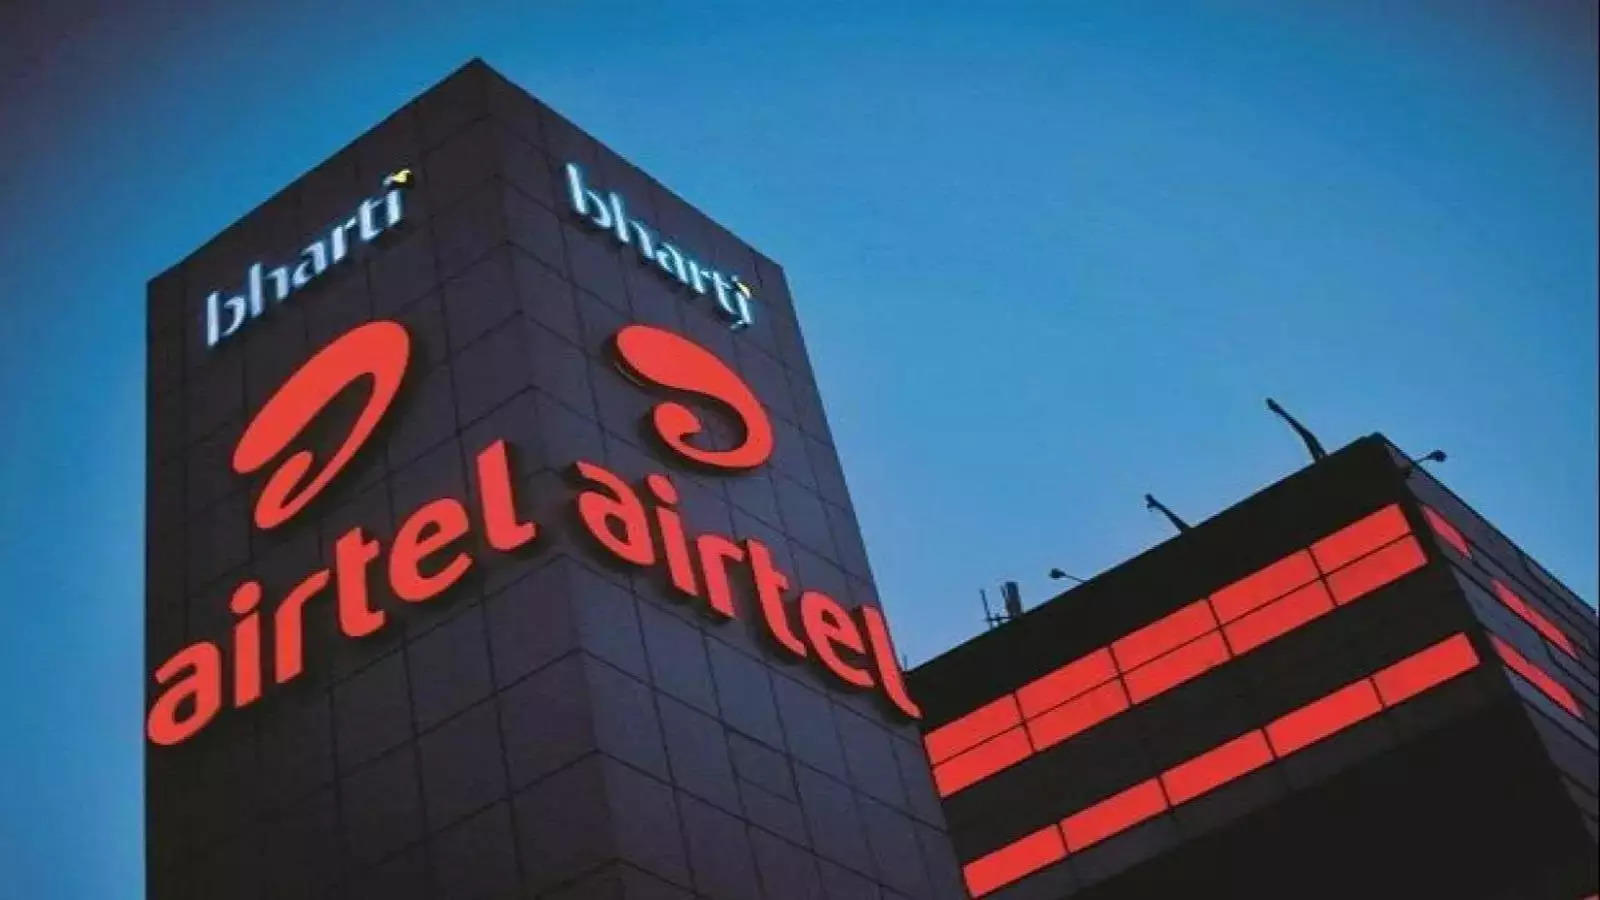 Bharti Airtel's merger deal with Dialog Axiata in Sri Lanka gets regulatory approval 